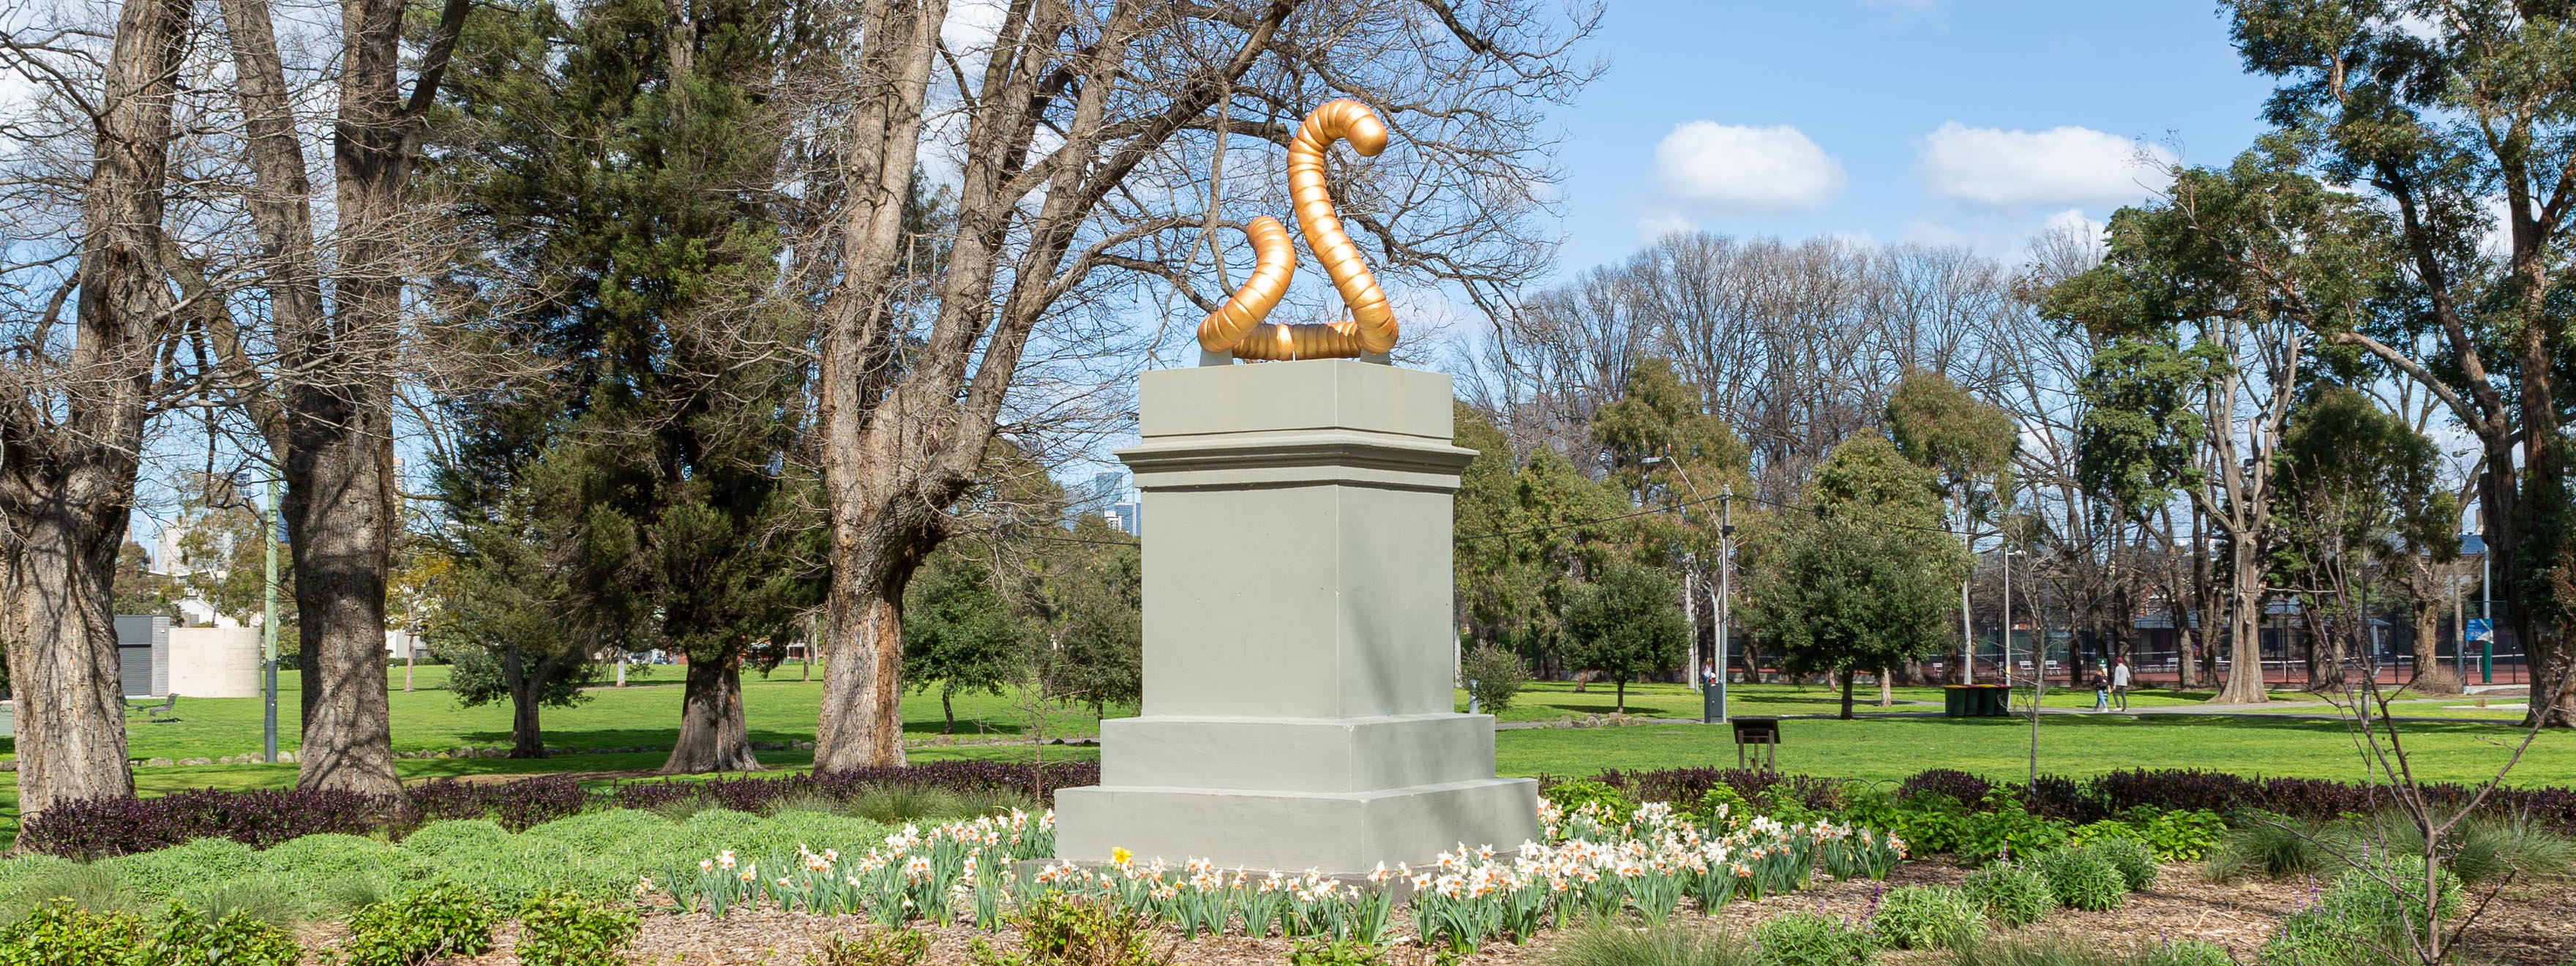 Image of the giant worm by Kathy Holowko at Edinburgh Gardens 